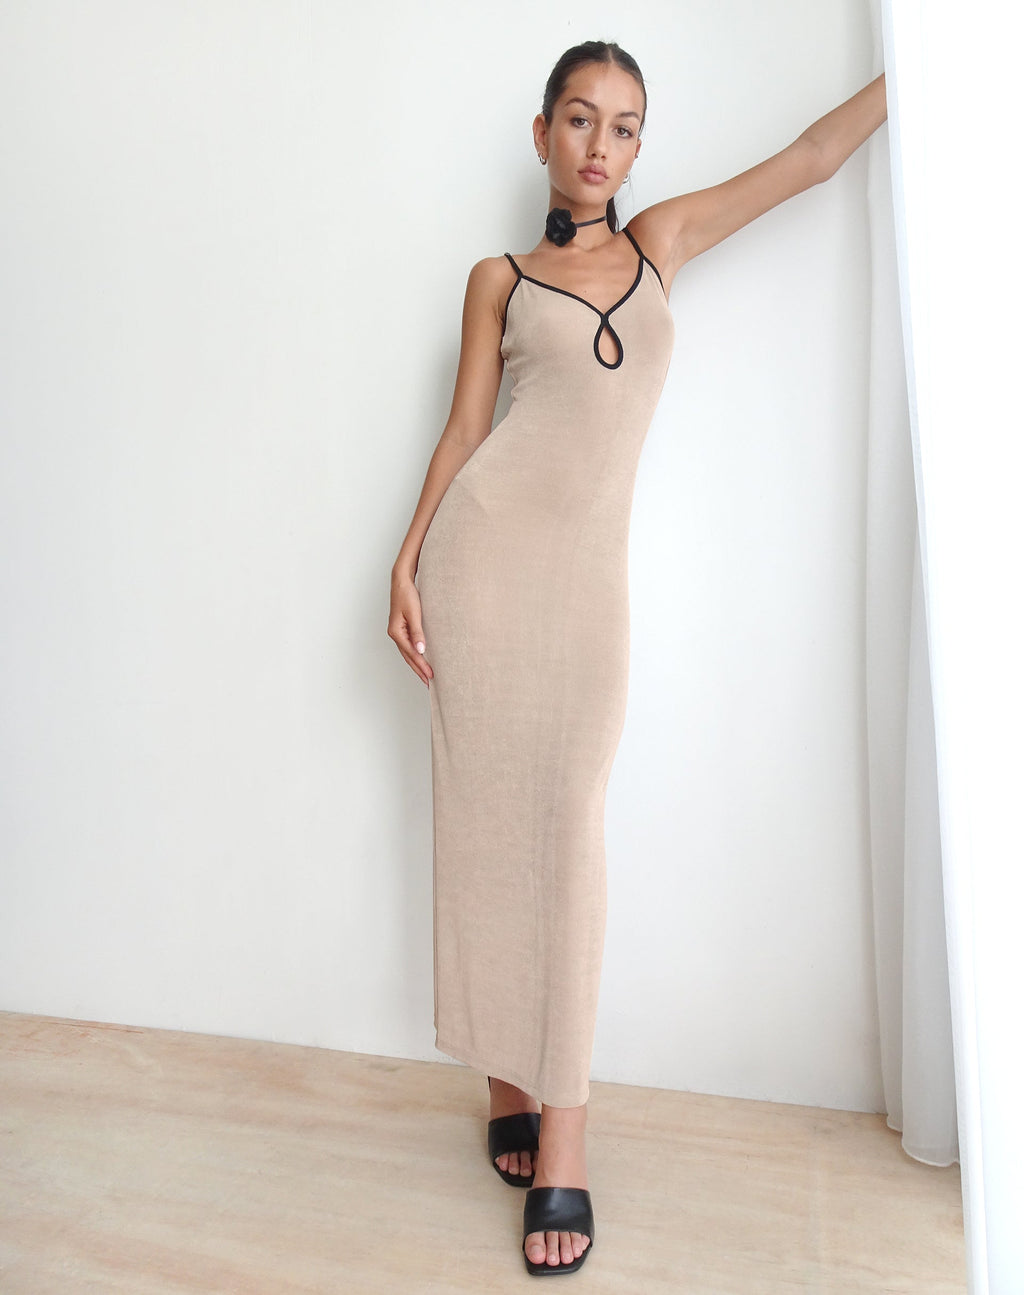 Tahlia Maxi Dress in Champagne with Black Binding